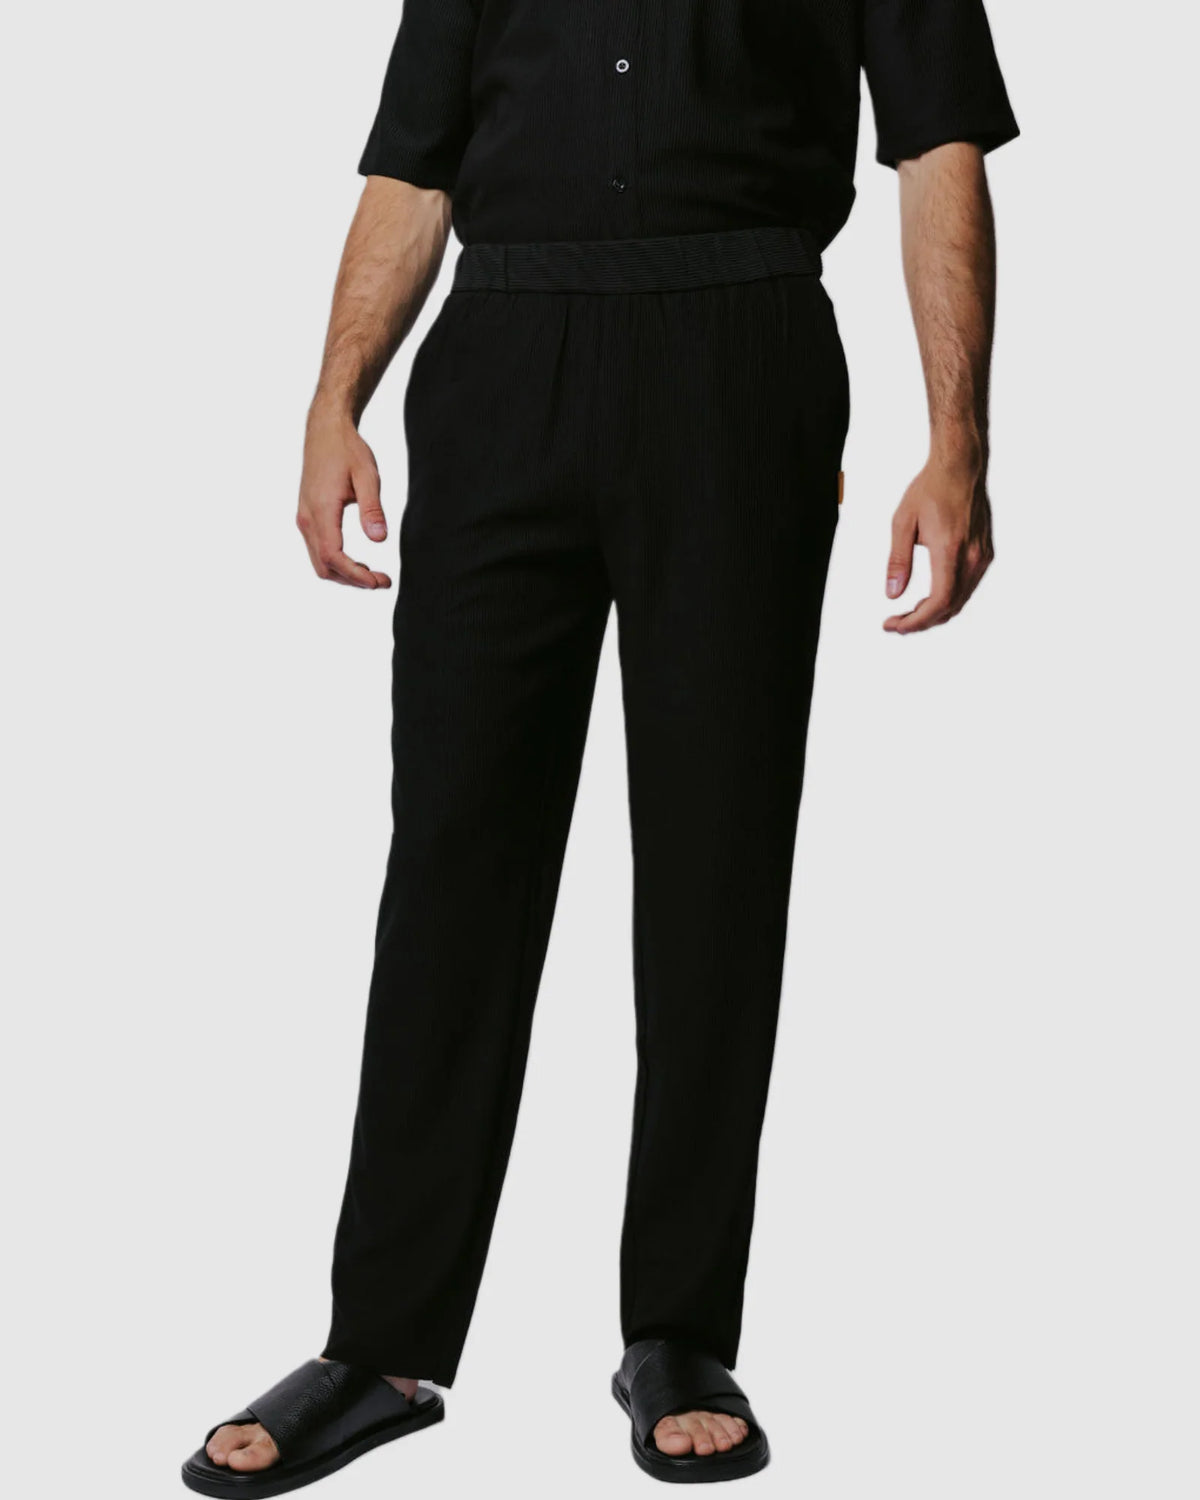 Justin Cassin Abade Pleated Pants in Black Color 4